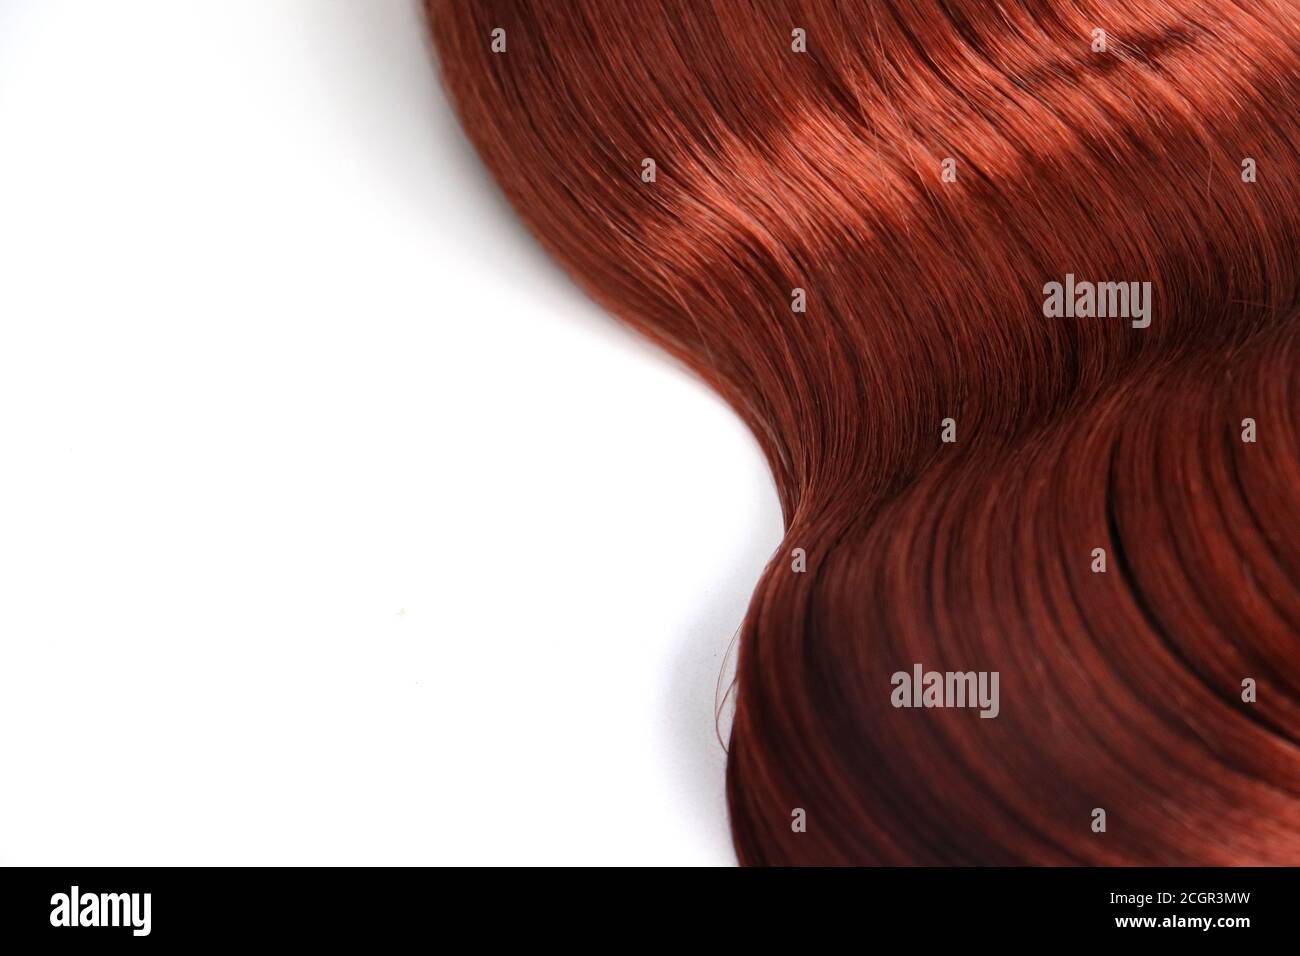 red auburn wavy hair piece isolated on white background Stock Photo